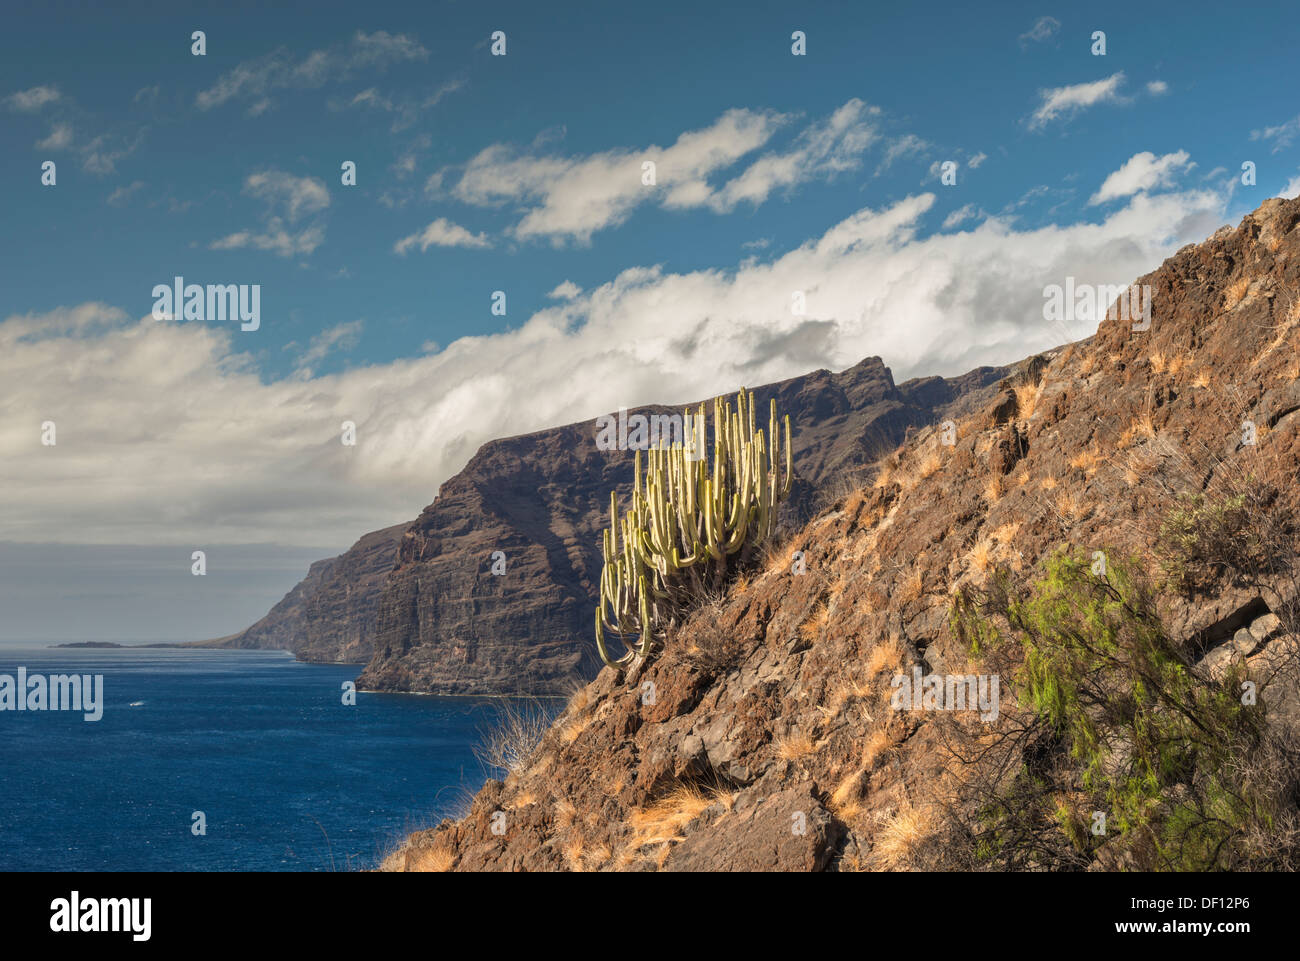 Native plants, cardon (Euphorbia canariensis) and balo (Plocama pendula), with the huge cliffs of Los Gigantes in the background Stock Photo